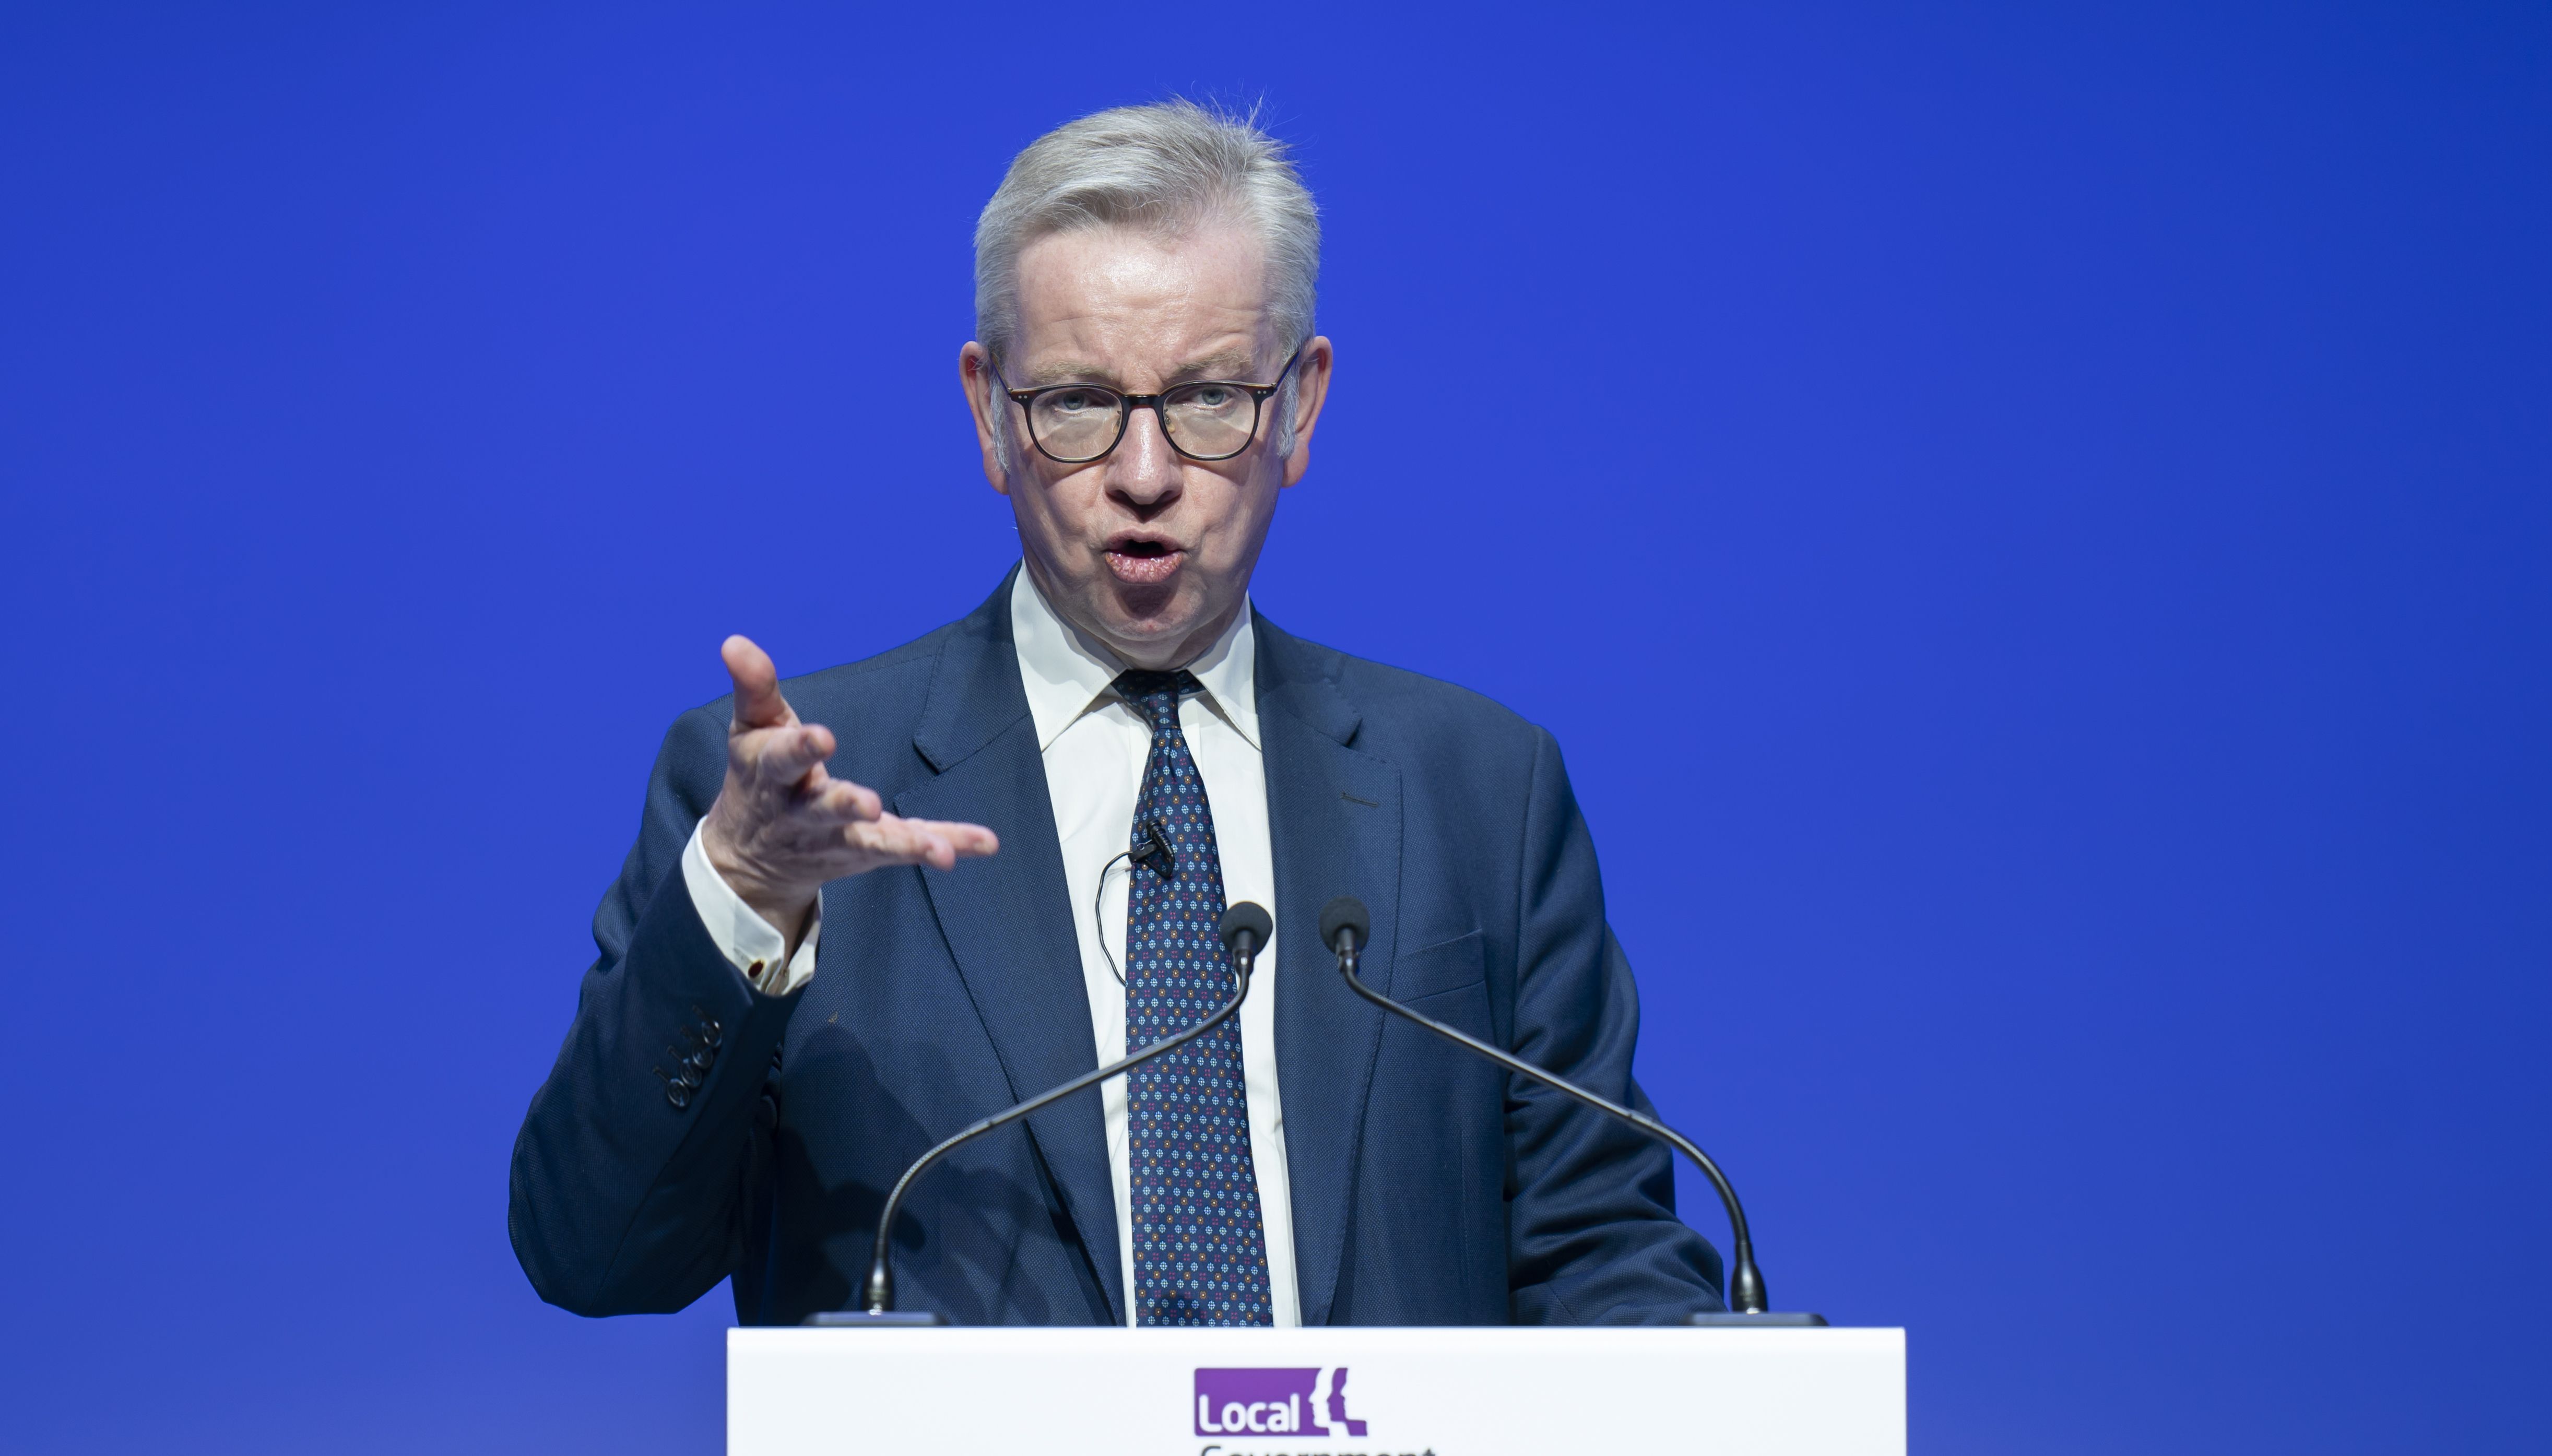 Michael Gove was sacked by Boris Johnson this evening